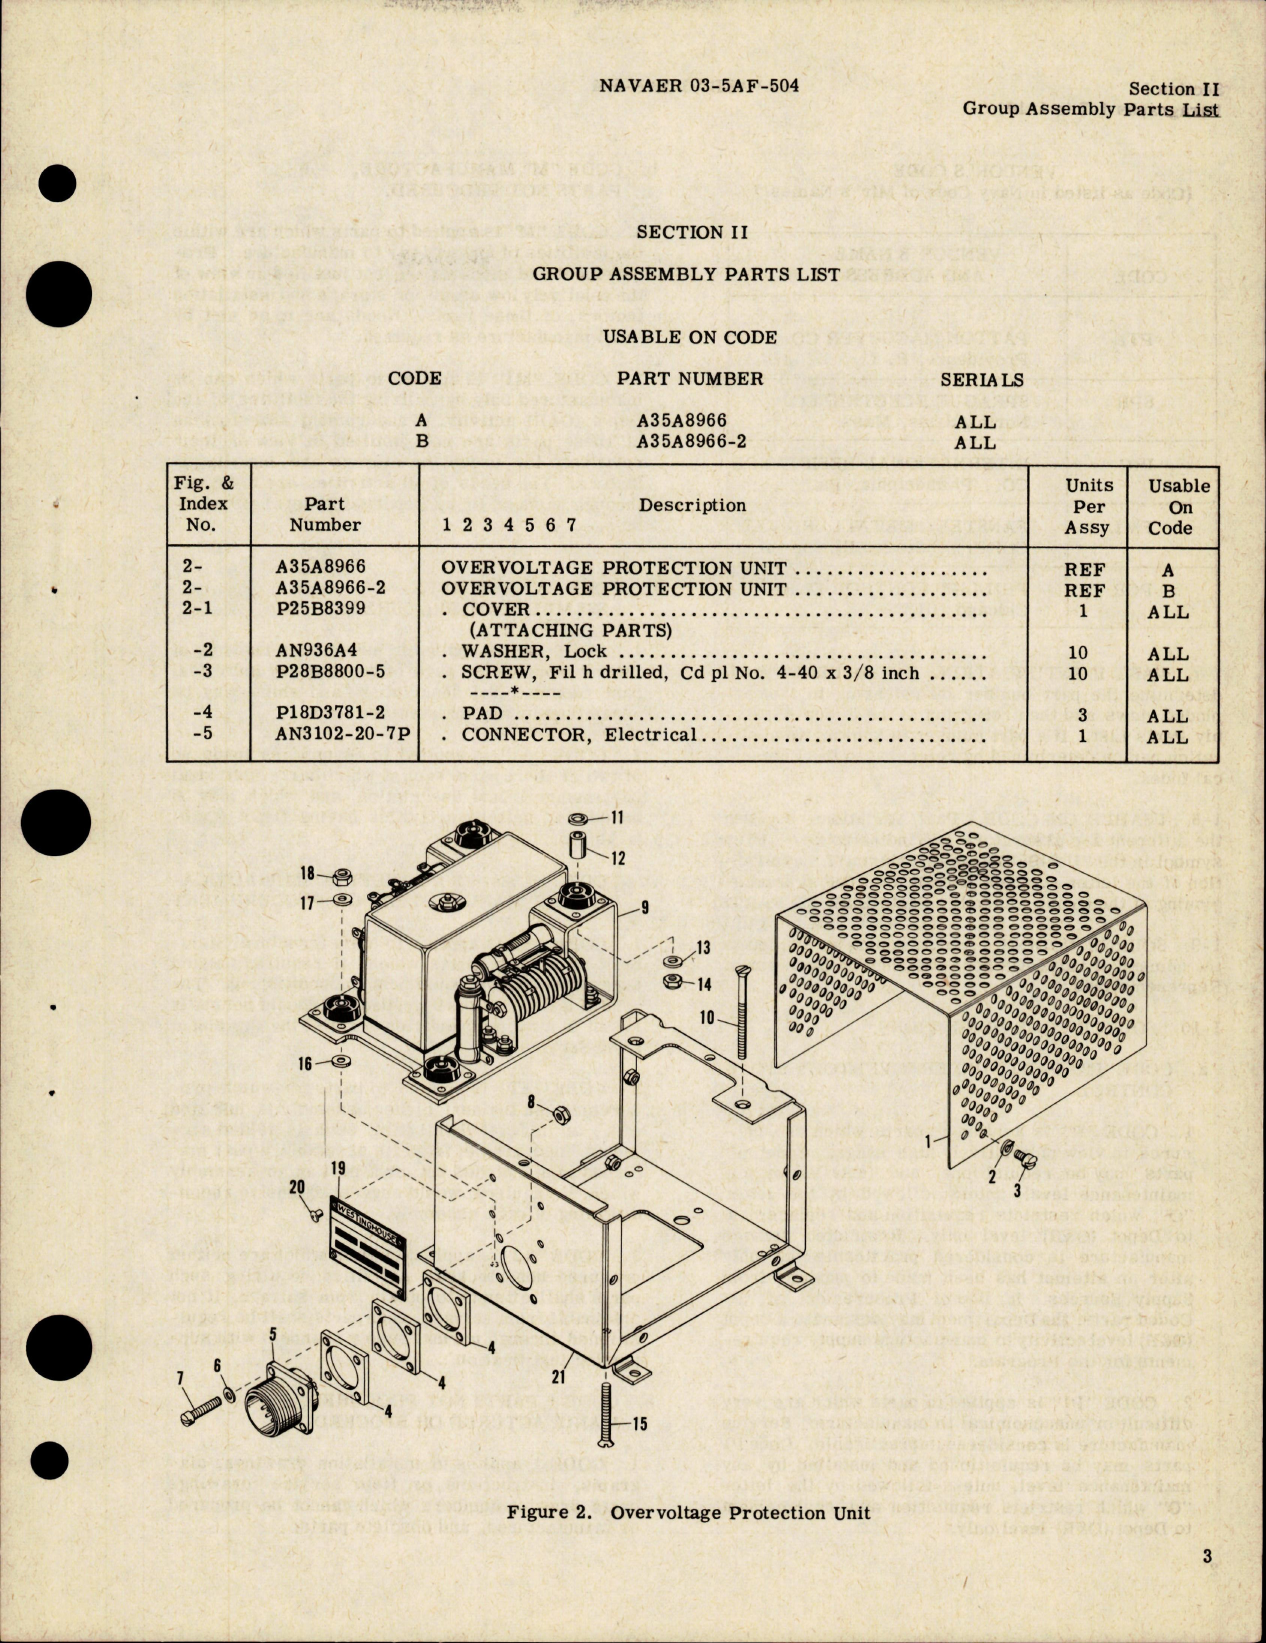 Sample page 5 from AirCorps Library document: Illustrated Parts Breakdown for Overvoltage Protection Unit - Model A35A8966, A35A8966-2 